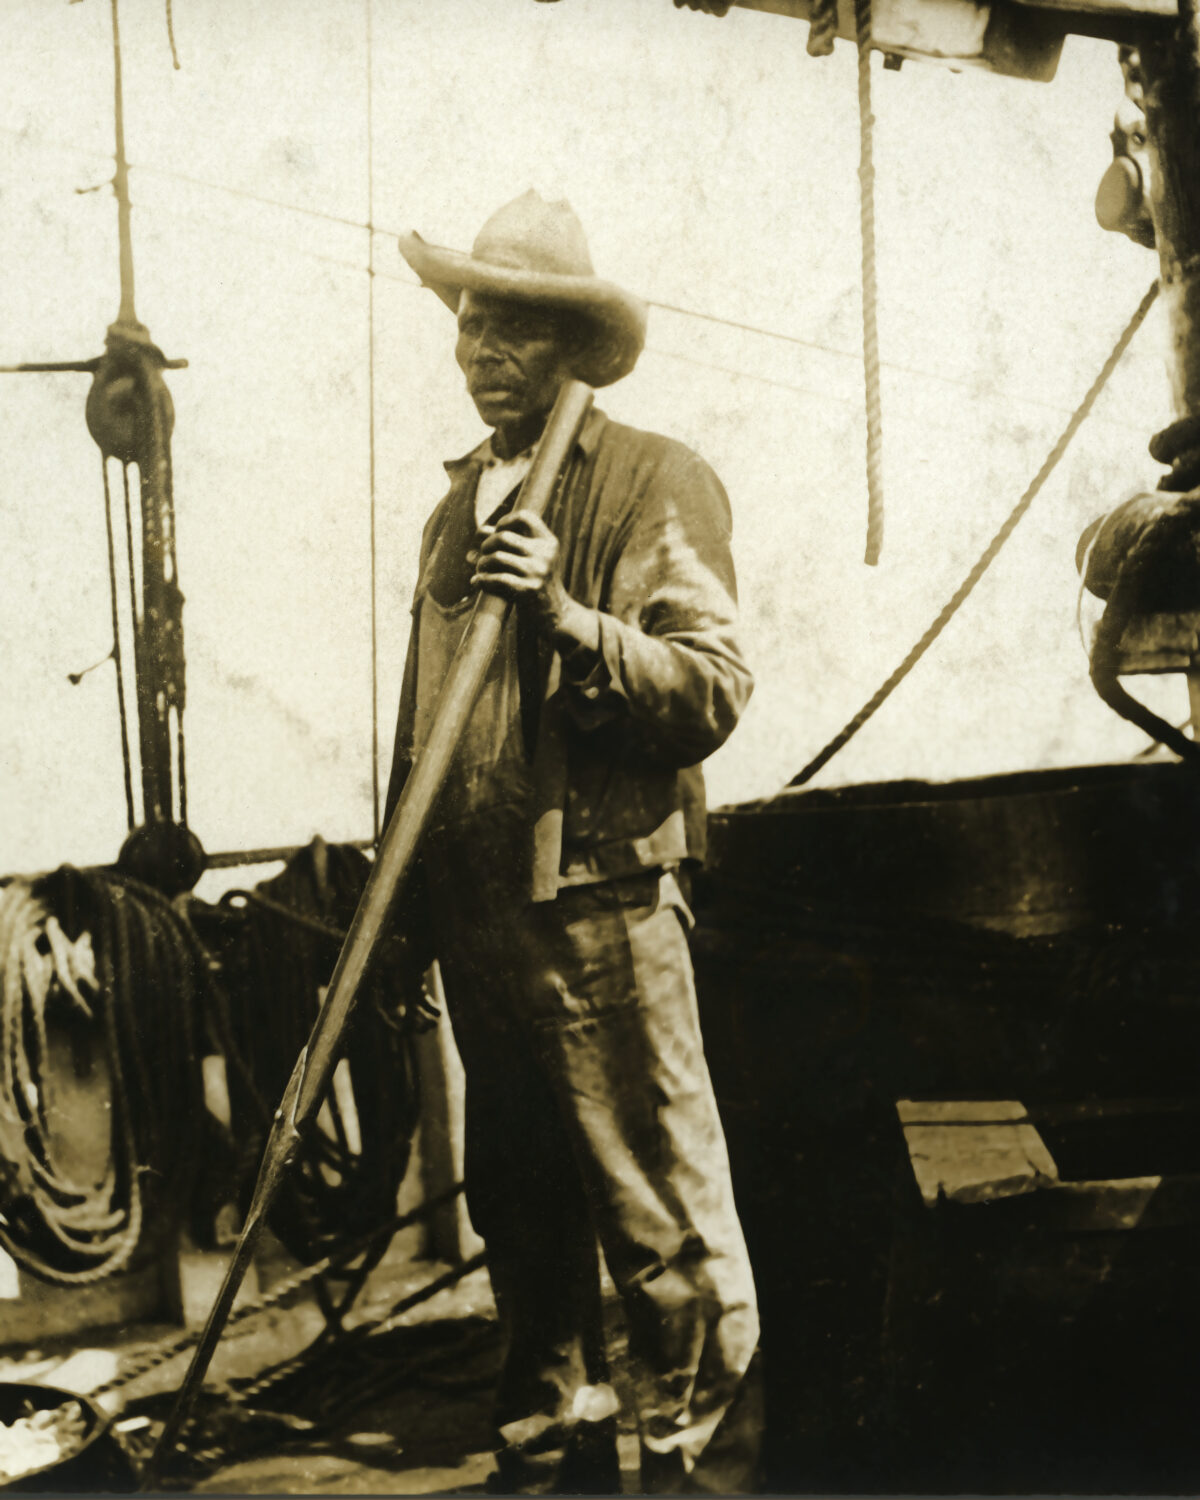 This whaleman, shown onboard an unknown vessel, has been identified by family members as Charles W. Morgan crewmember Joe Gomez, a Cape Verdean-born man who later settled in New London, CT. ©Mystic Seaport Museum, 2009.22.84